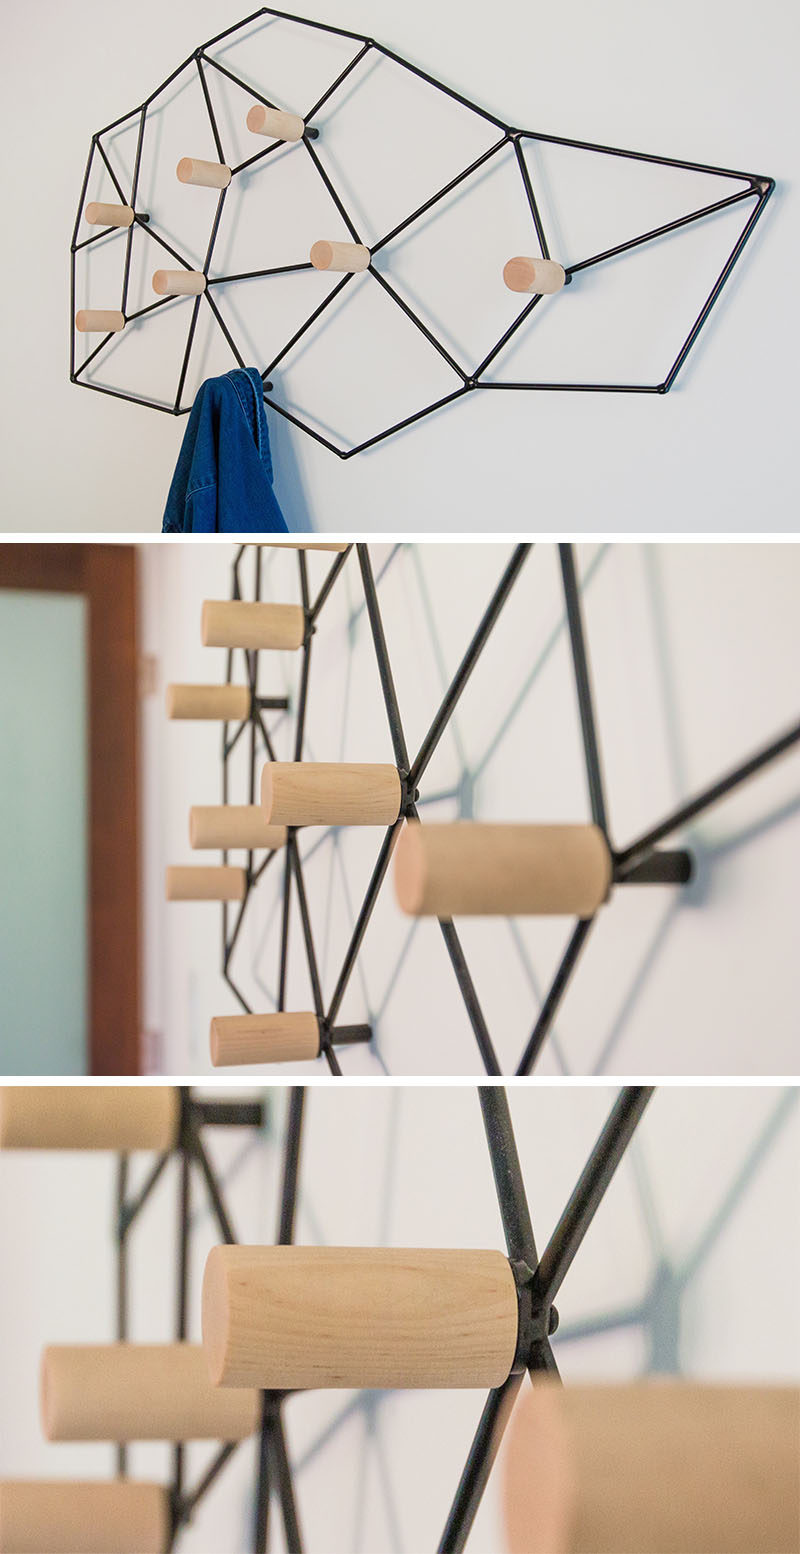 This geometric and modern wall-mounted coat rack could easily pass as wall art, and is made from a black metal frame that attaches to the wall, while wood pegs are positioned at the internal joints, creating a space to hang your jacket, scarf or bag.